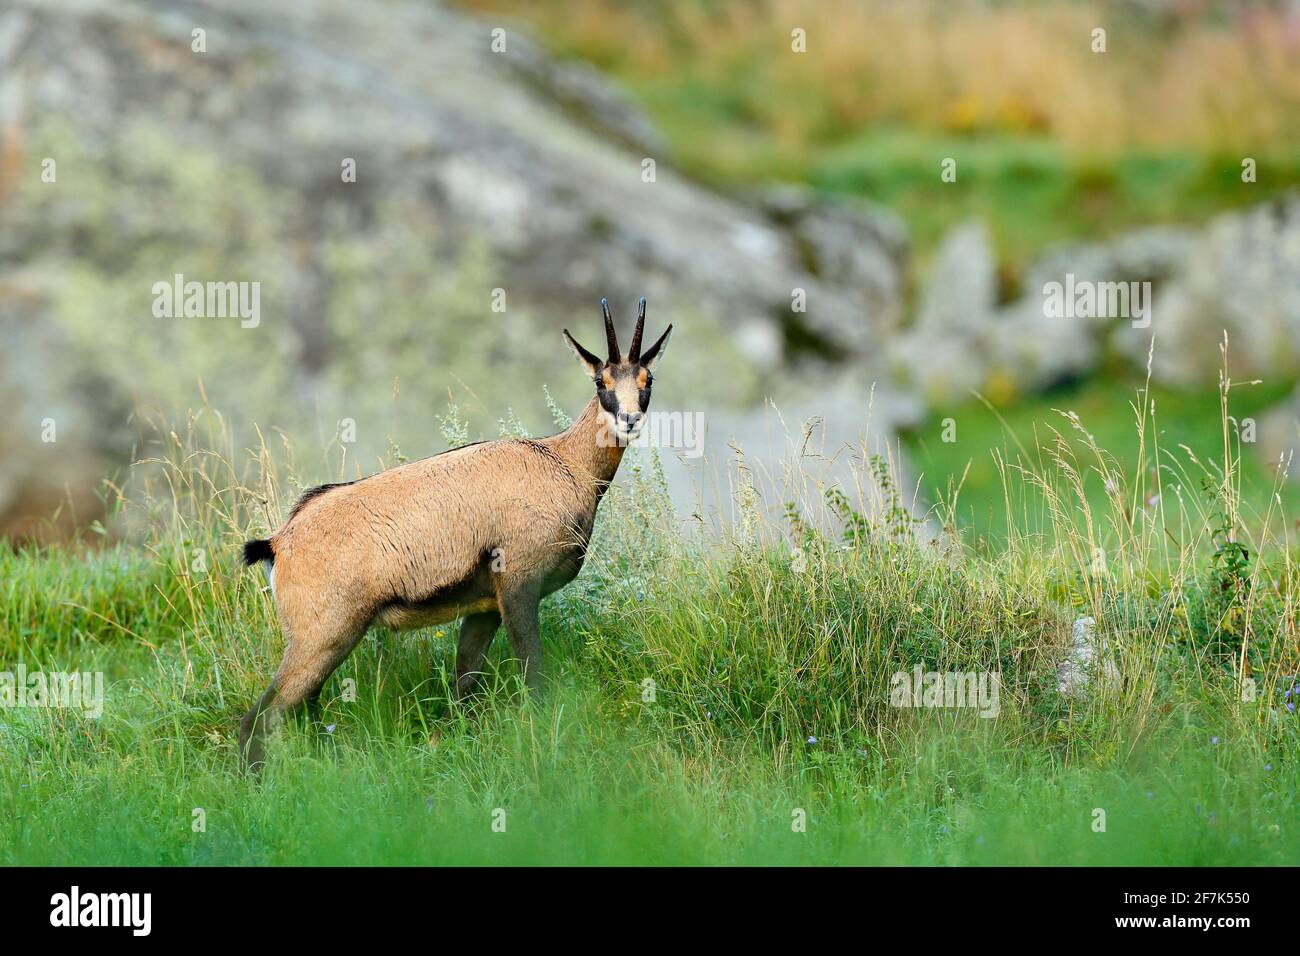 Chamois, Rupicapra rupicapra, in the green grass, grey rock in background, Gran Paradiso, Italy. Horned animal in the Alp. Wildlife scene from nature. Stock Photo